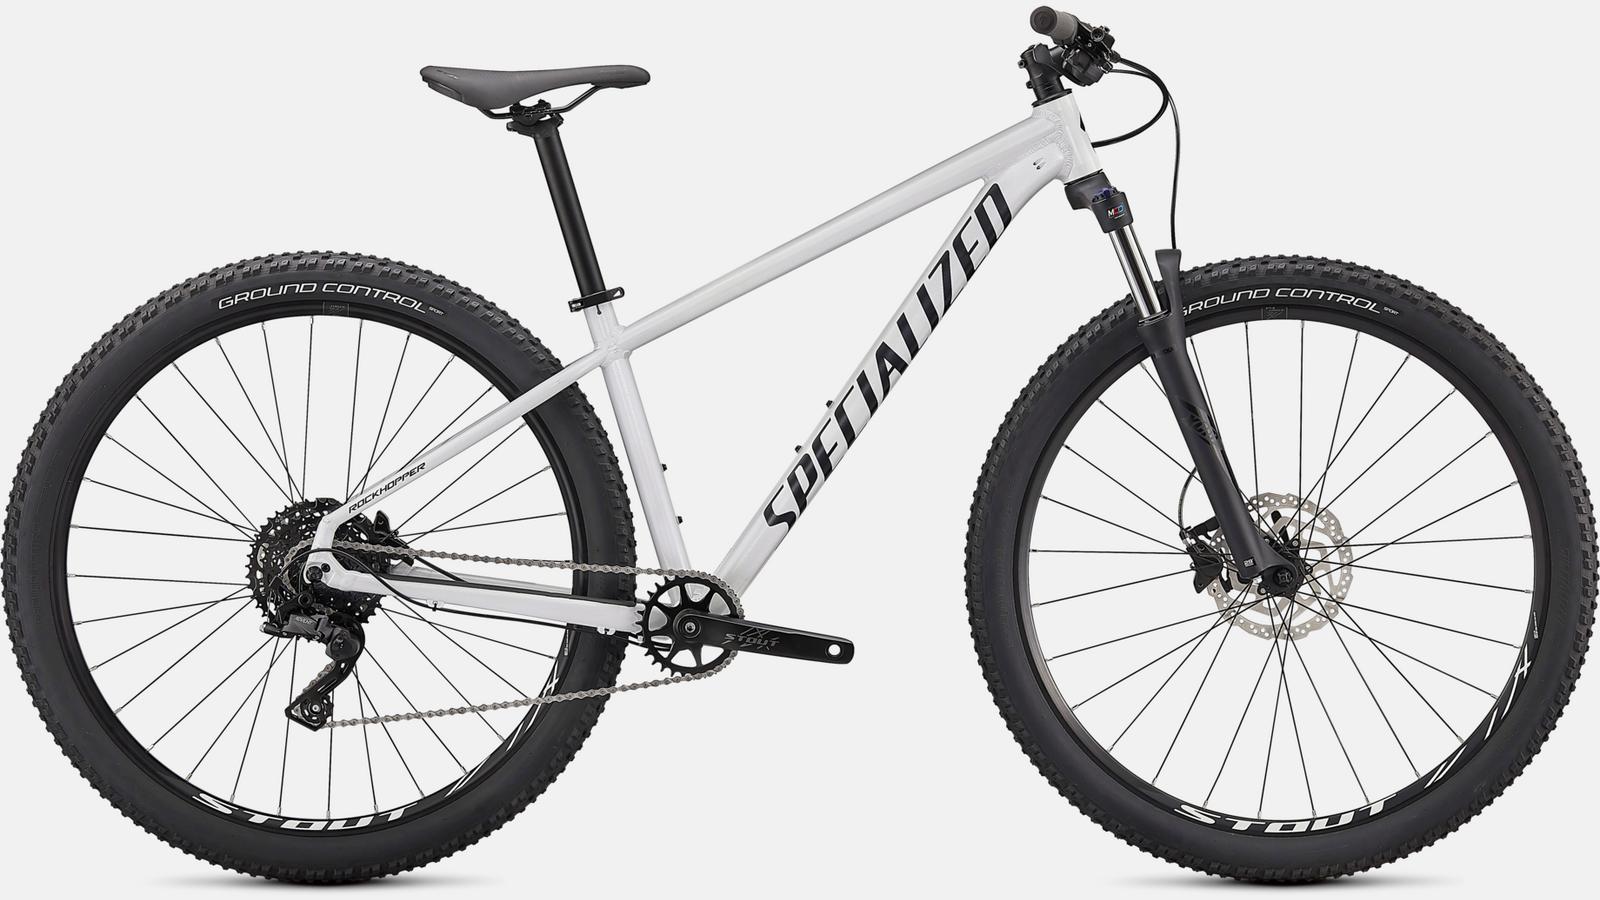 Paint for 2021 Specialized Rockhopper Comp - Gloss Metallic White Silver